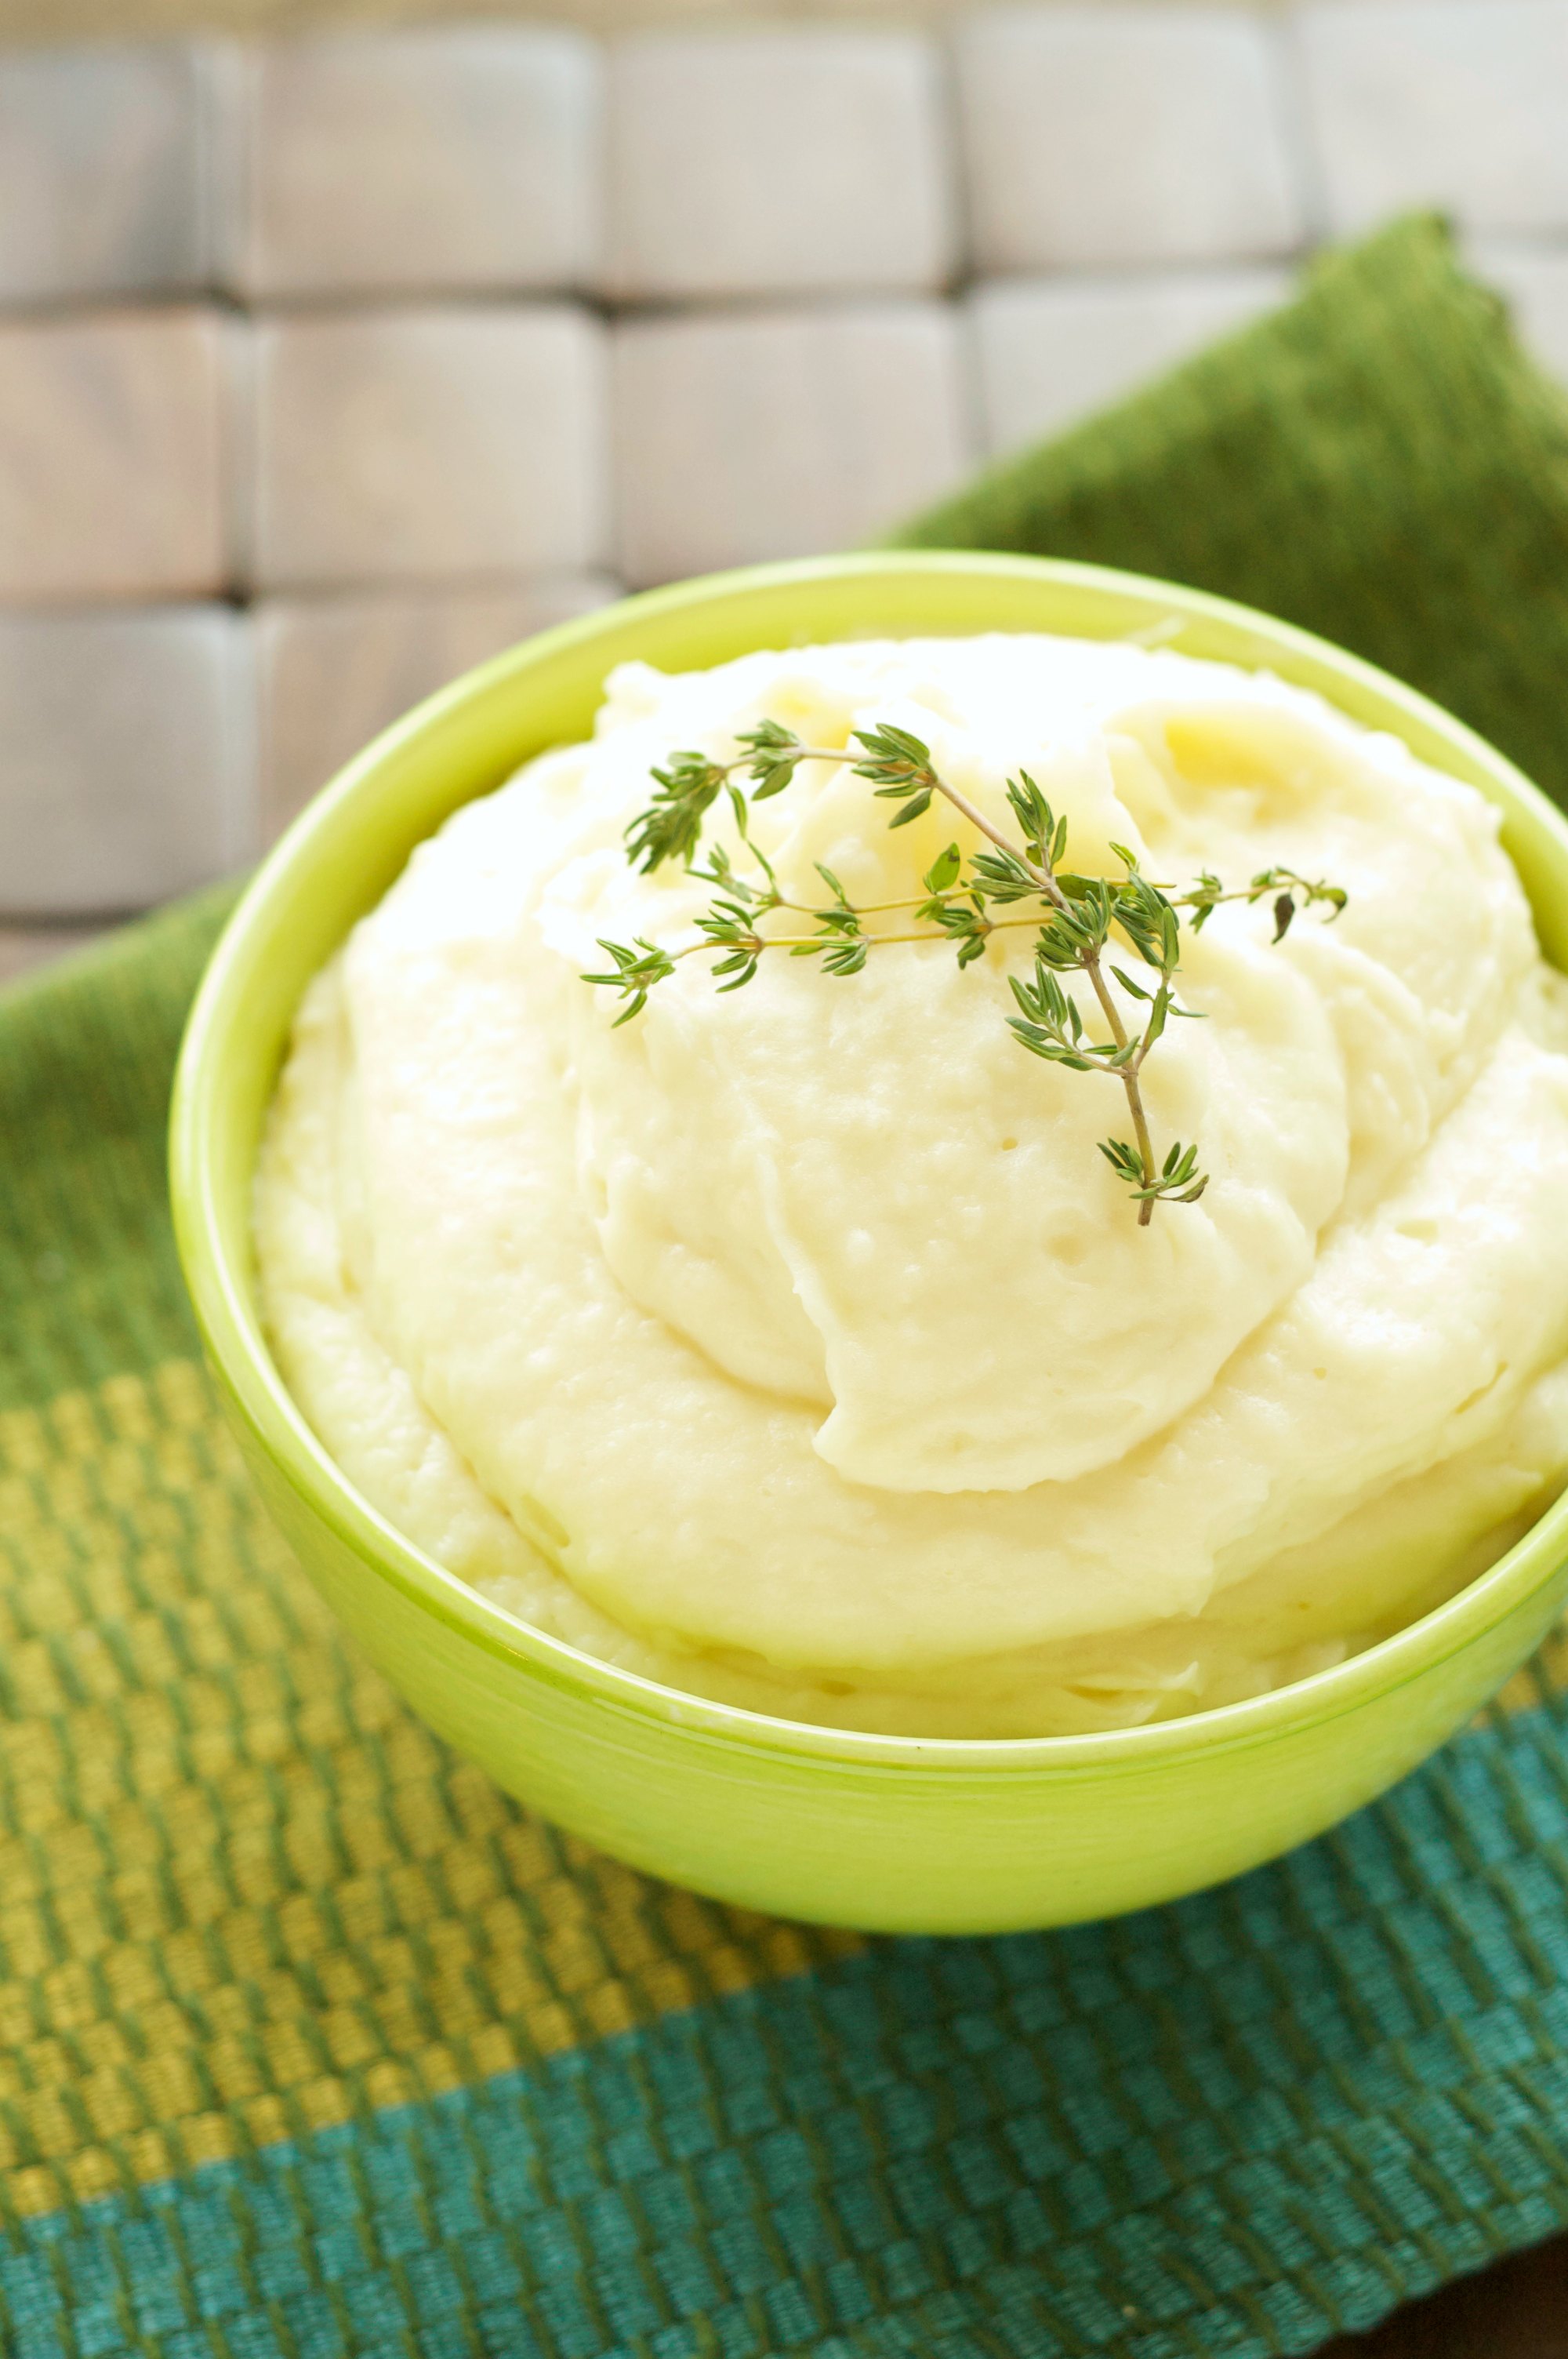 Mashed Potatoes in lime green bowl on green napkin